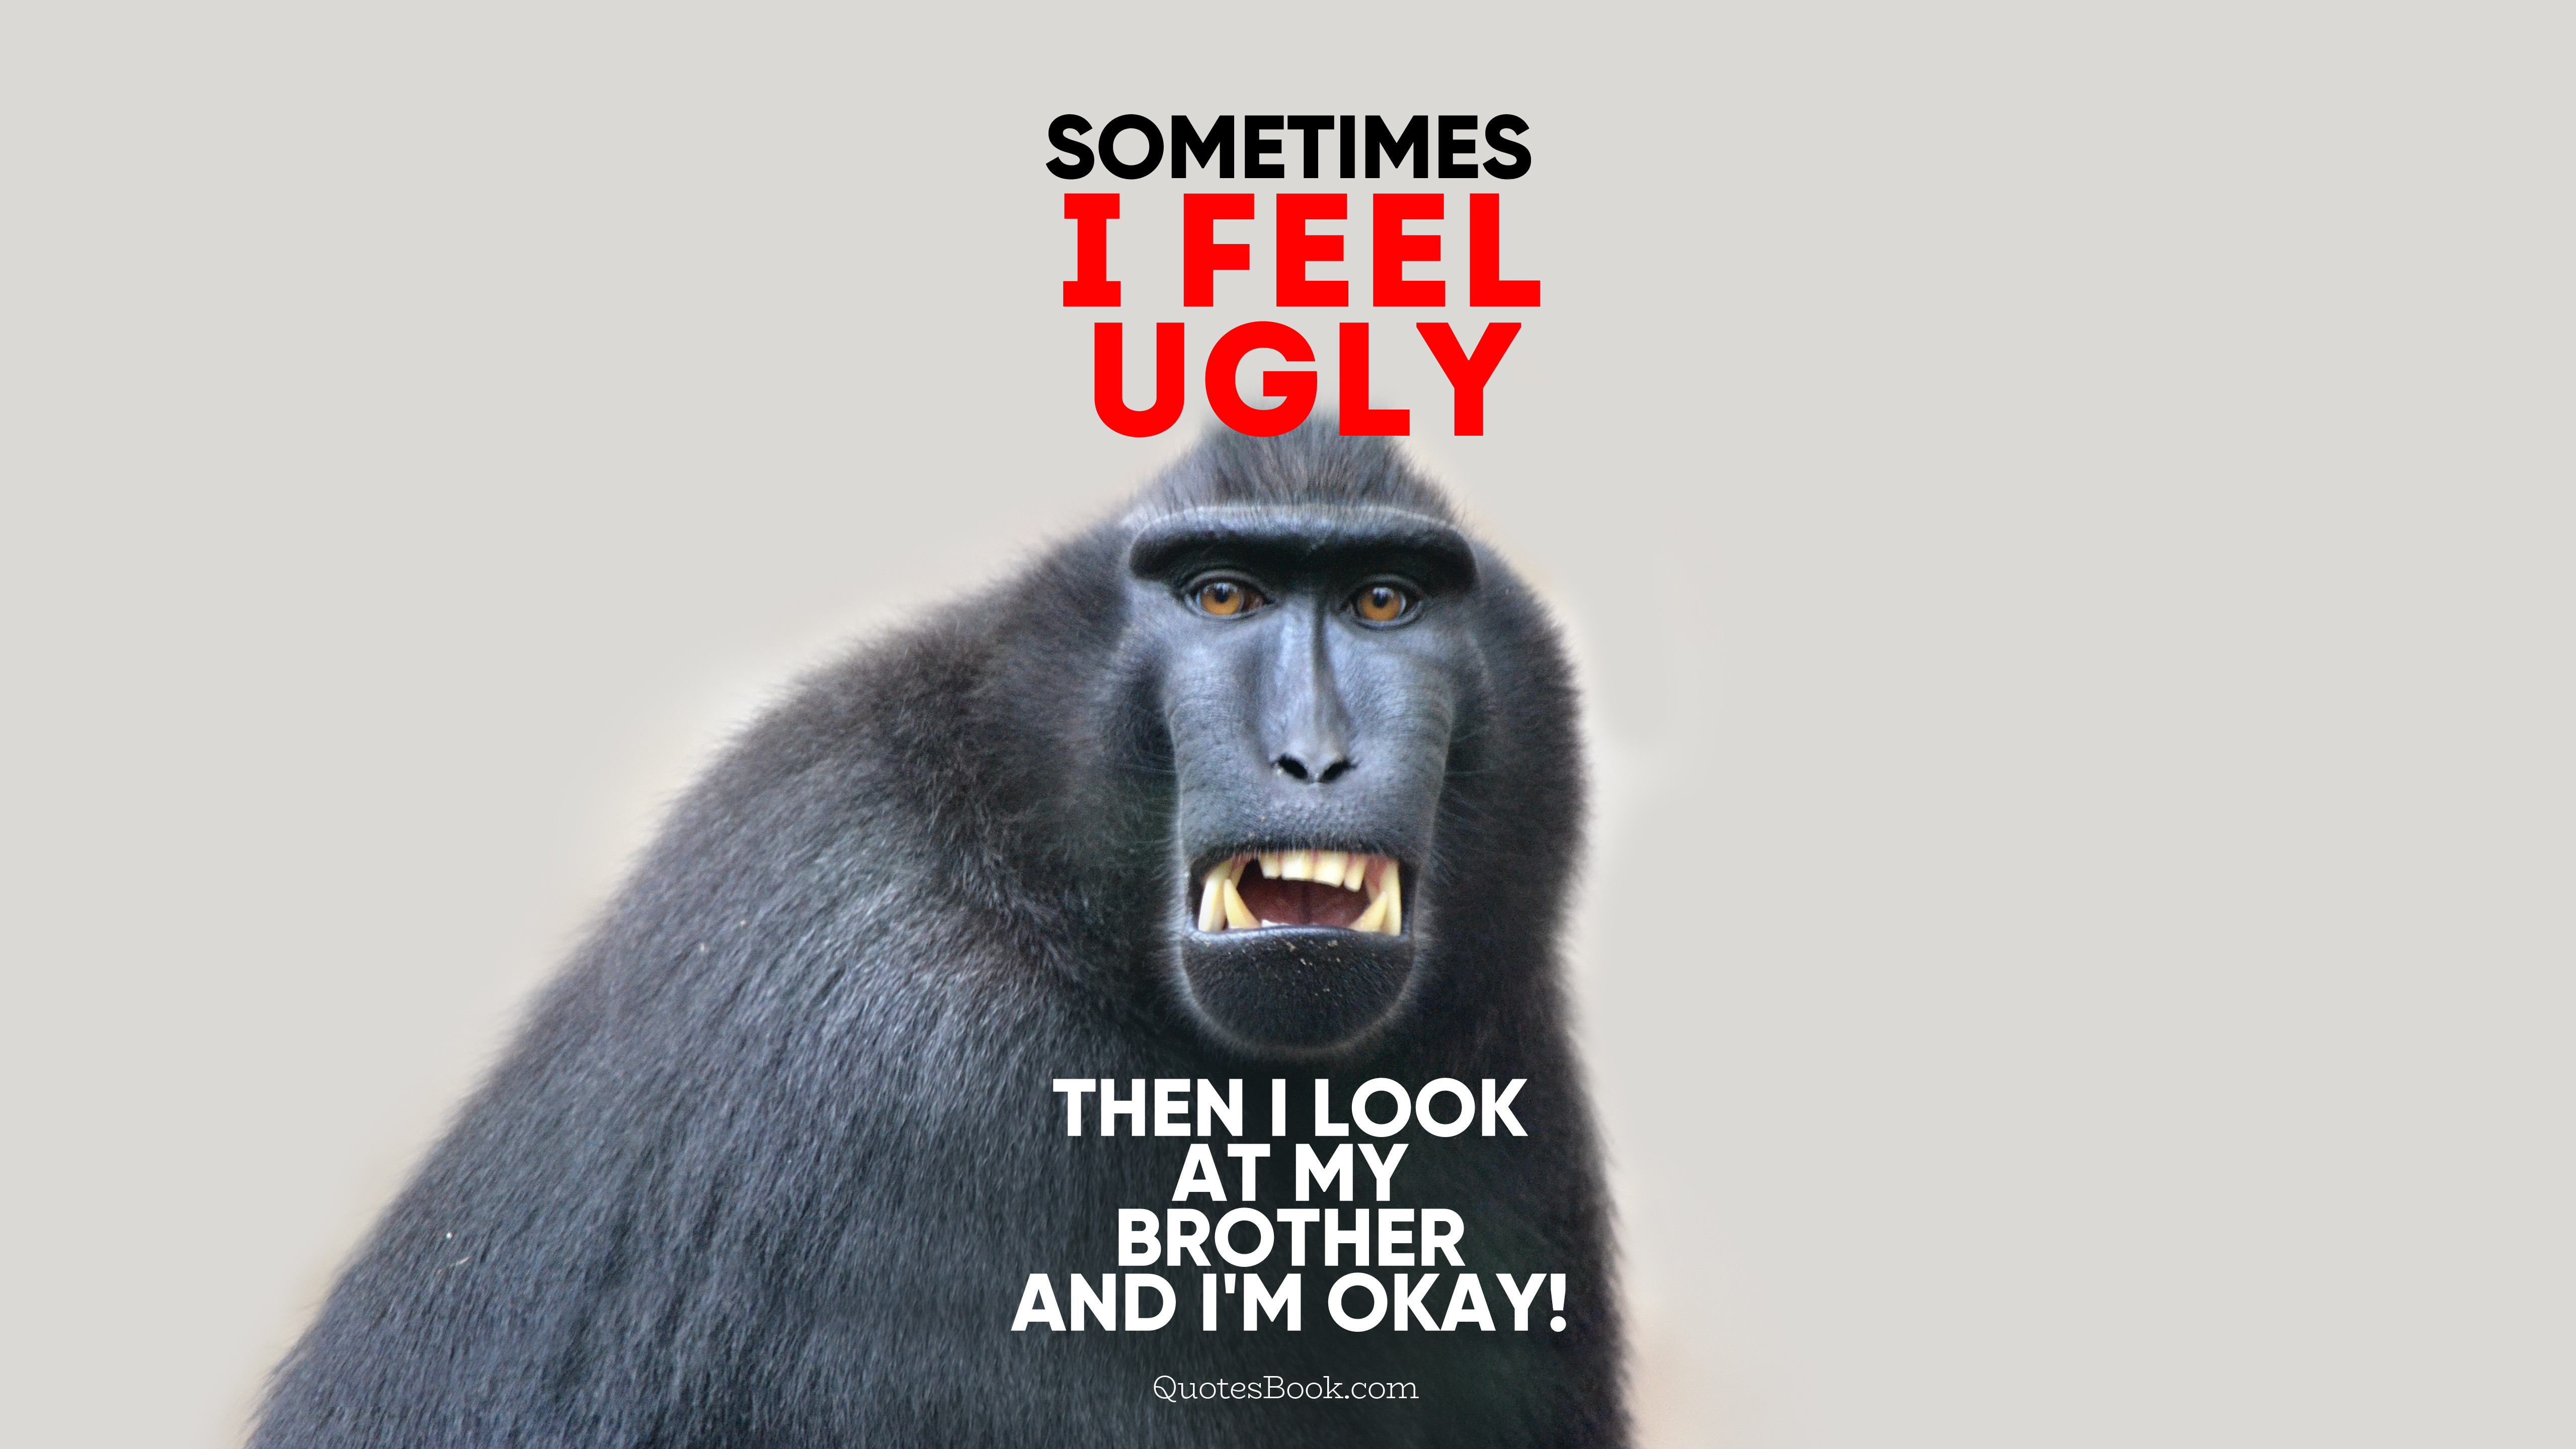 Sometimes I feel ugly then I look at my brother and I'm okay! - QuotesBook